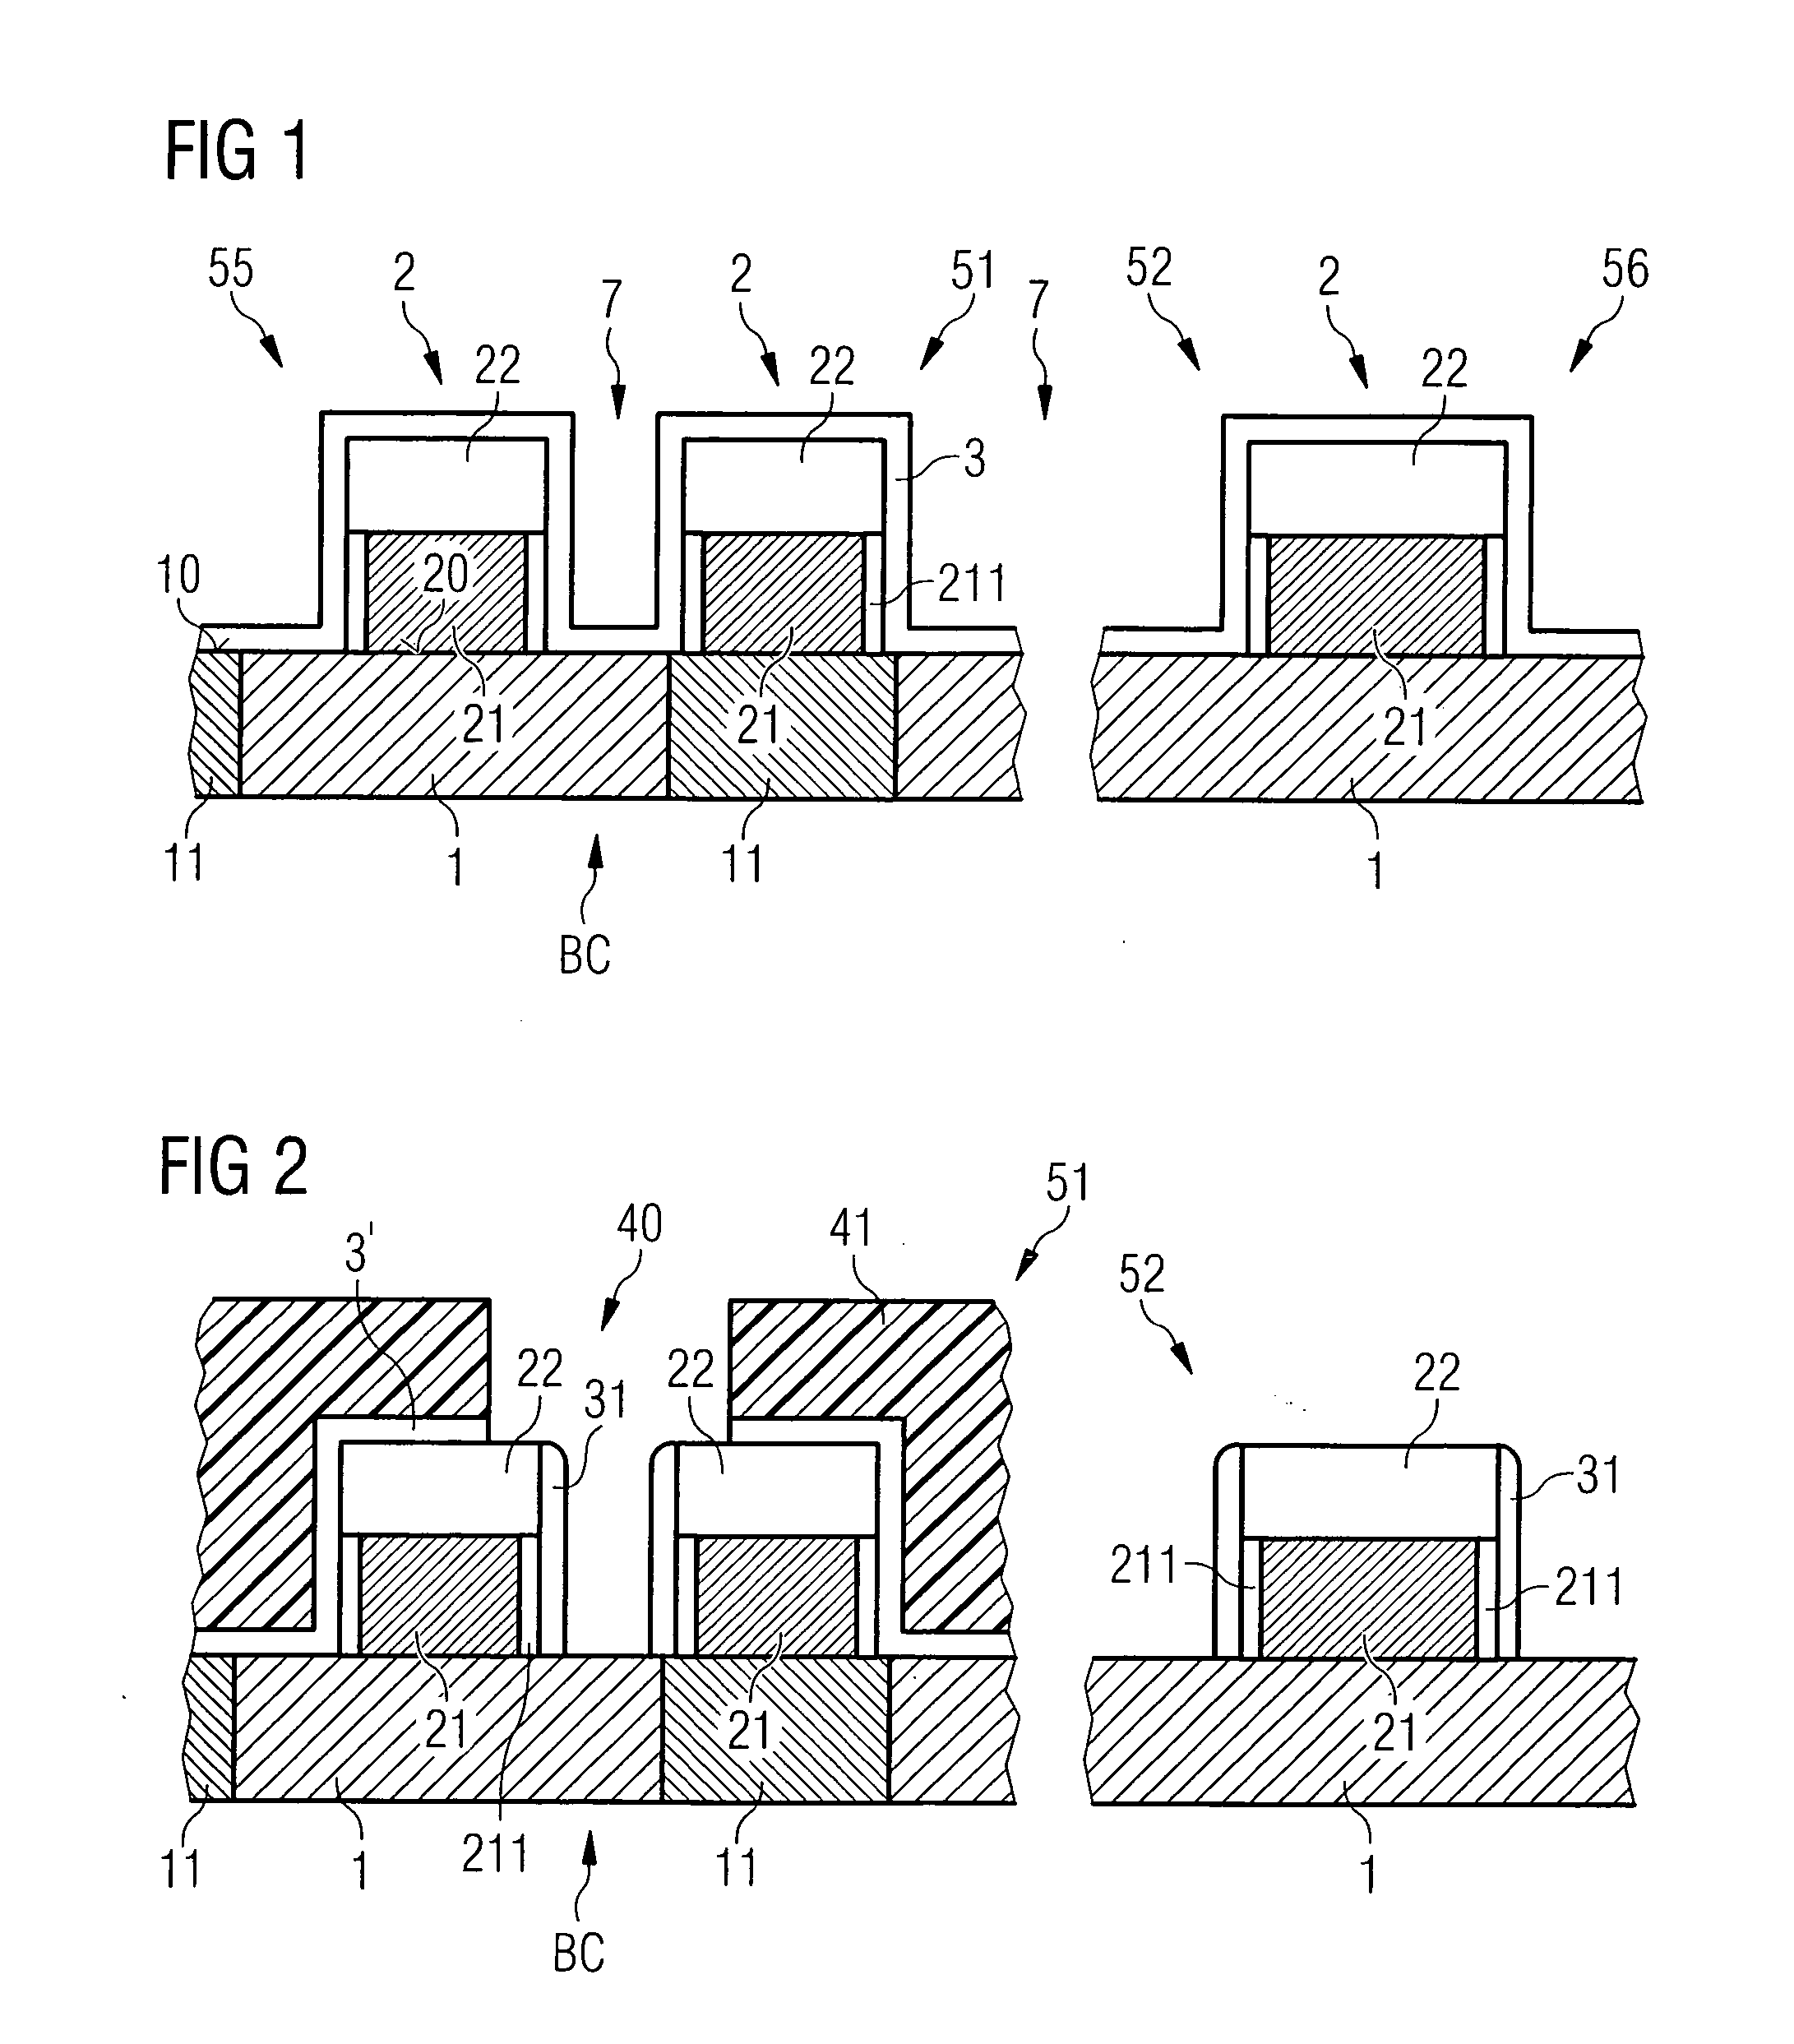 Fabricating transistor structures for DRAM semiconductor components